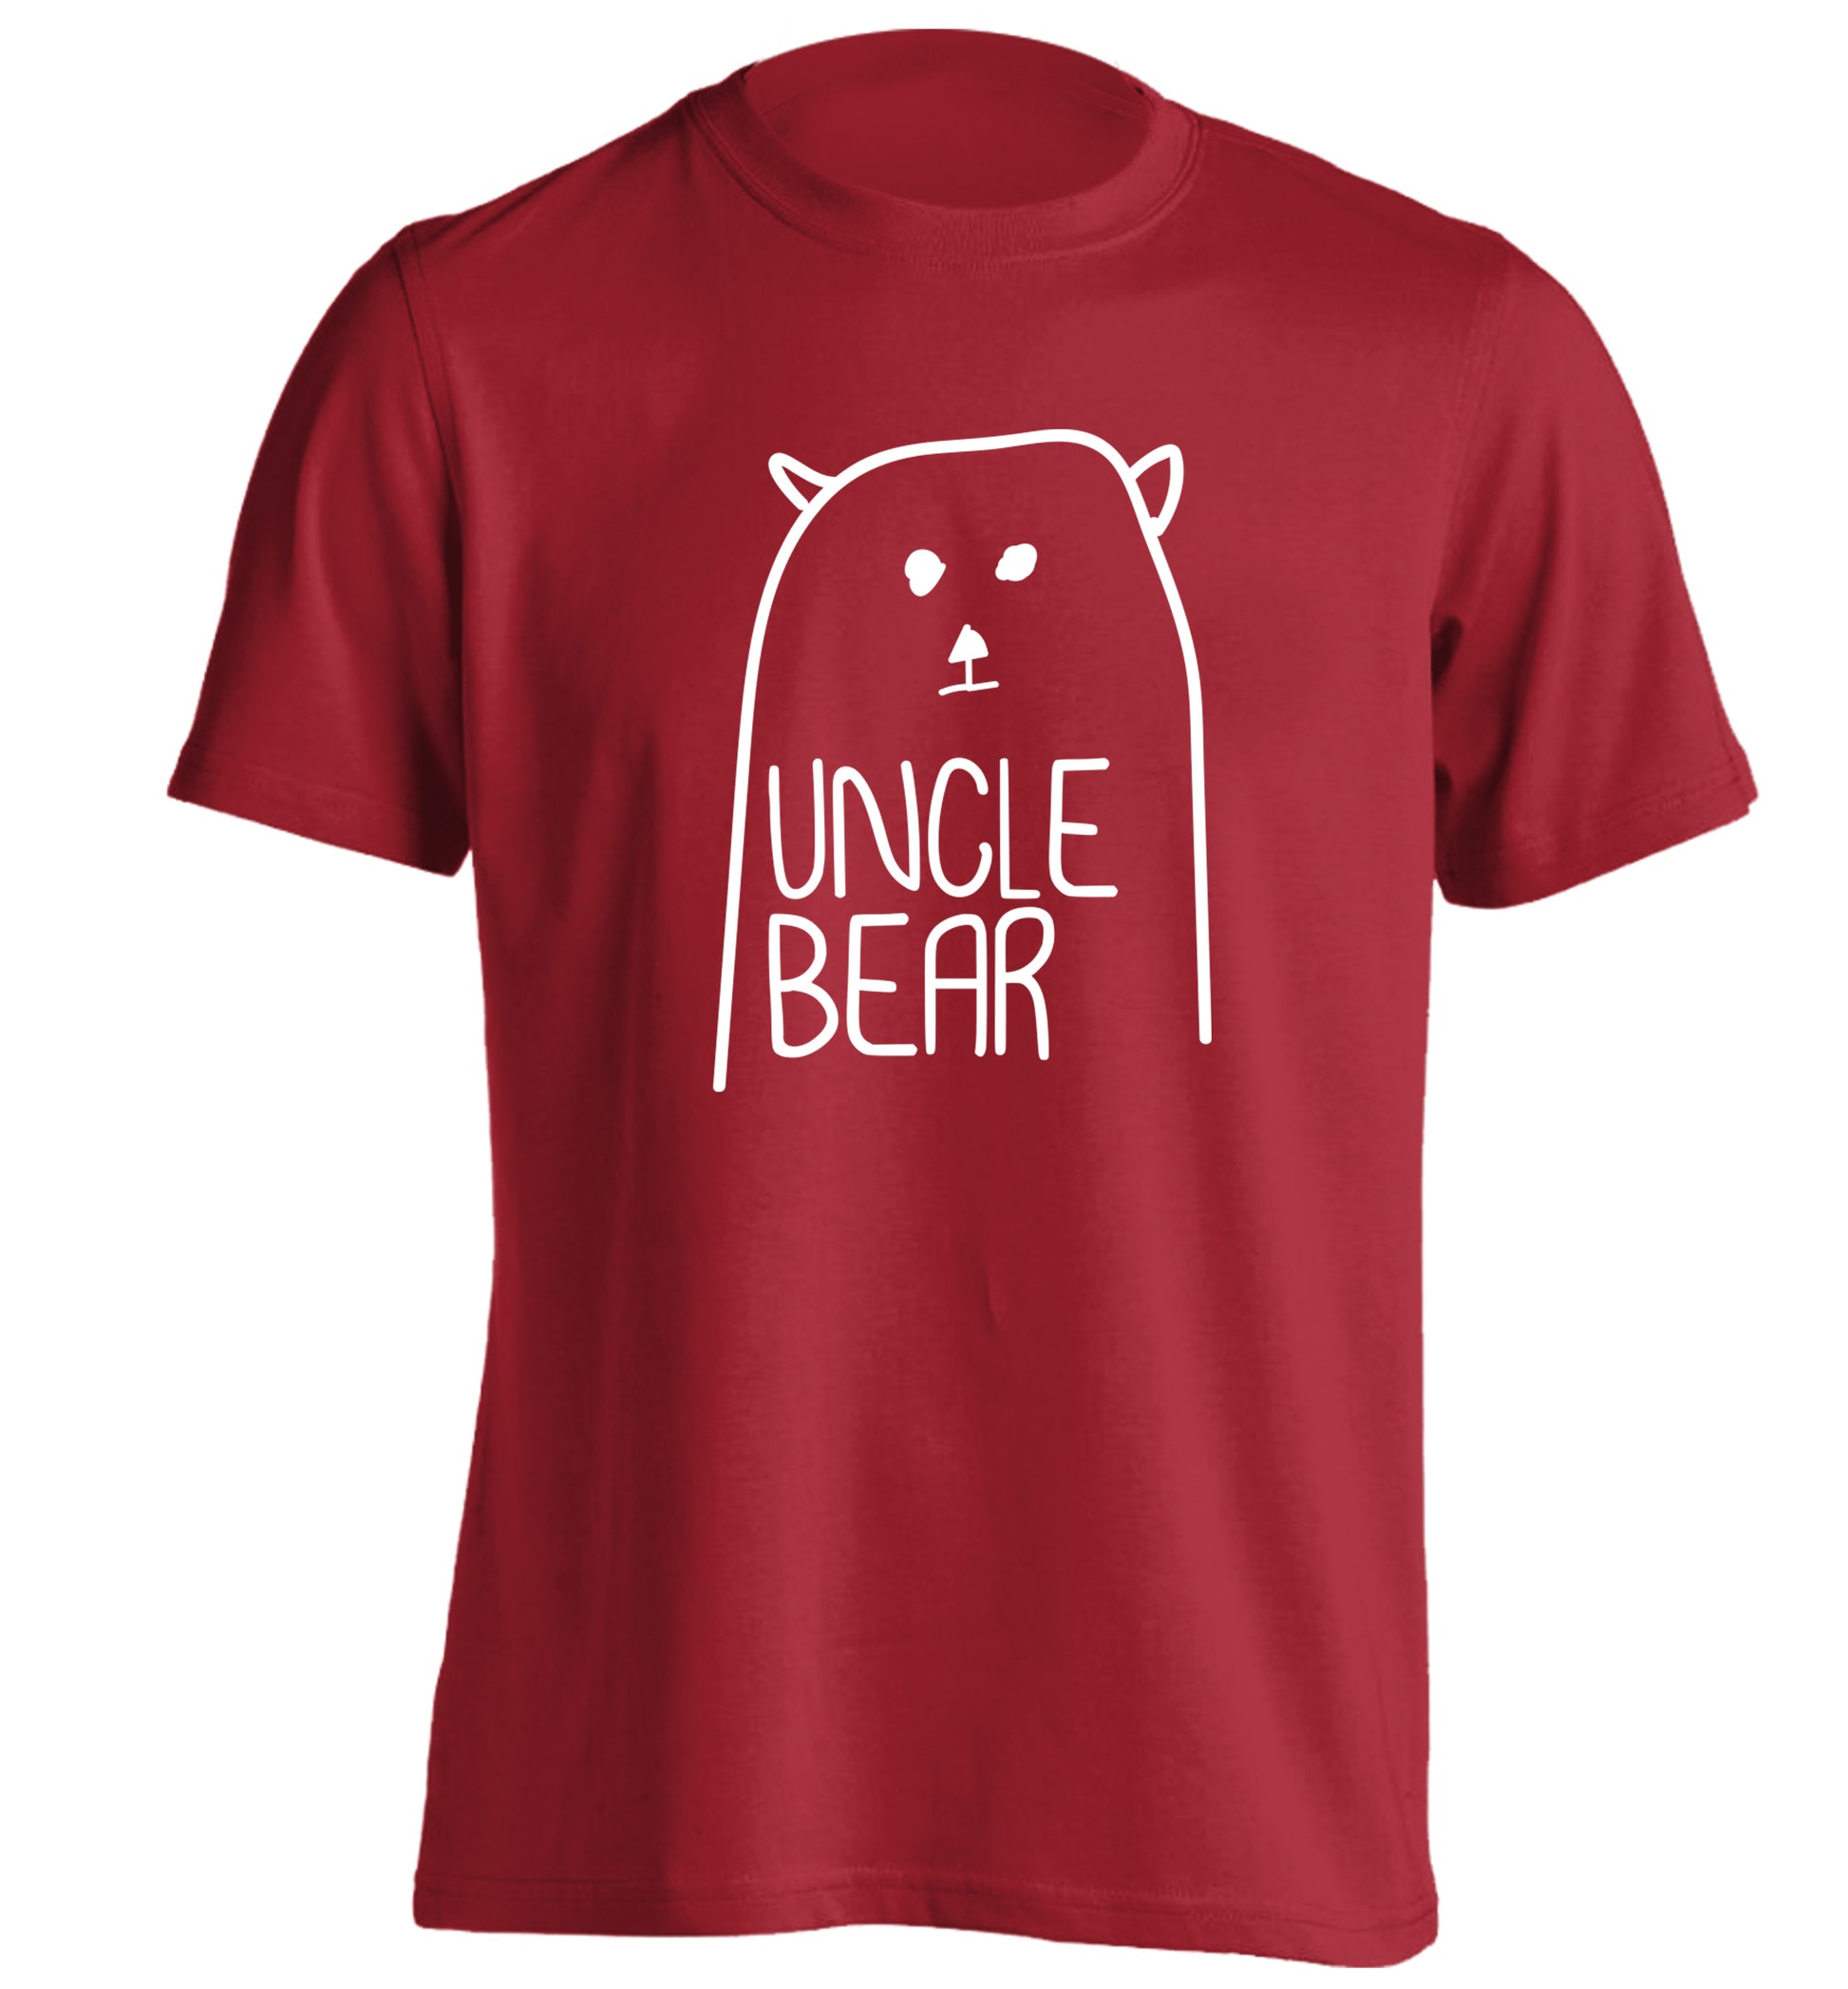 Uncle bear adults unisex red Tshirt 2XL